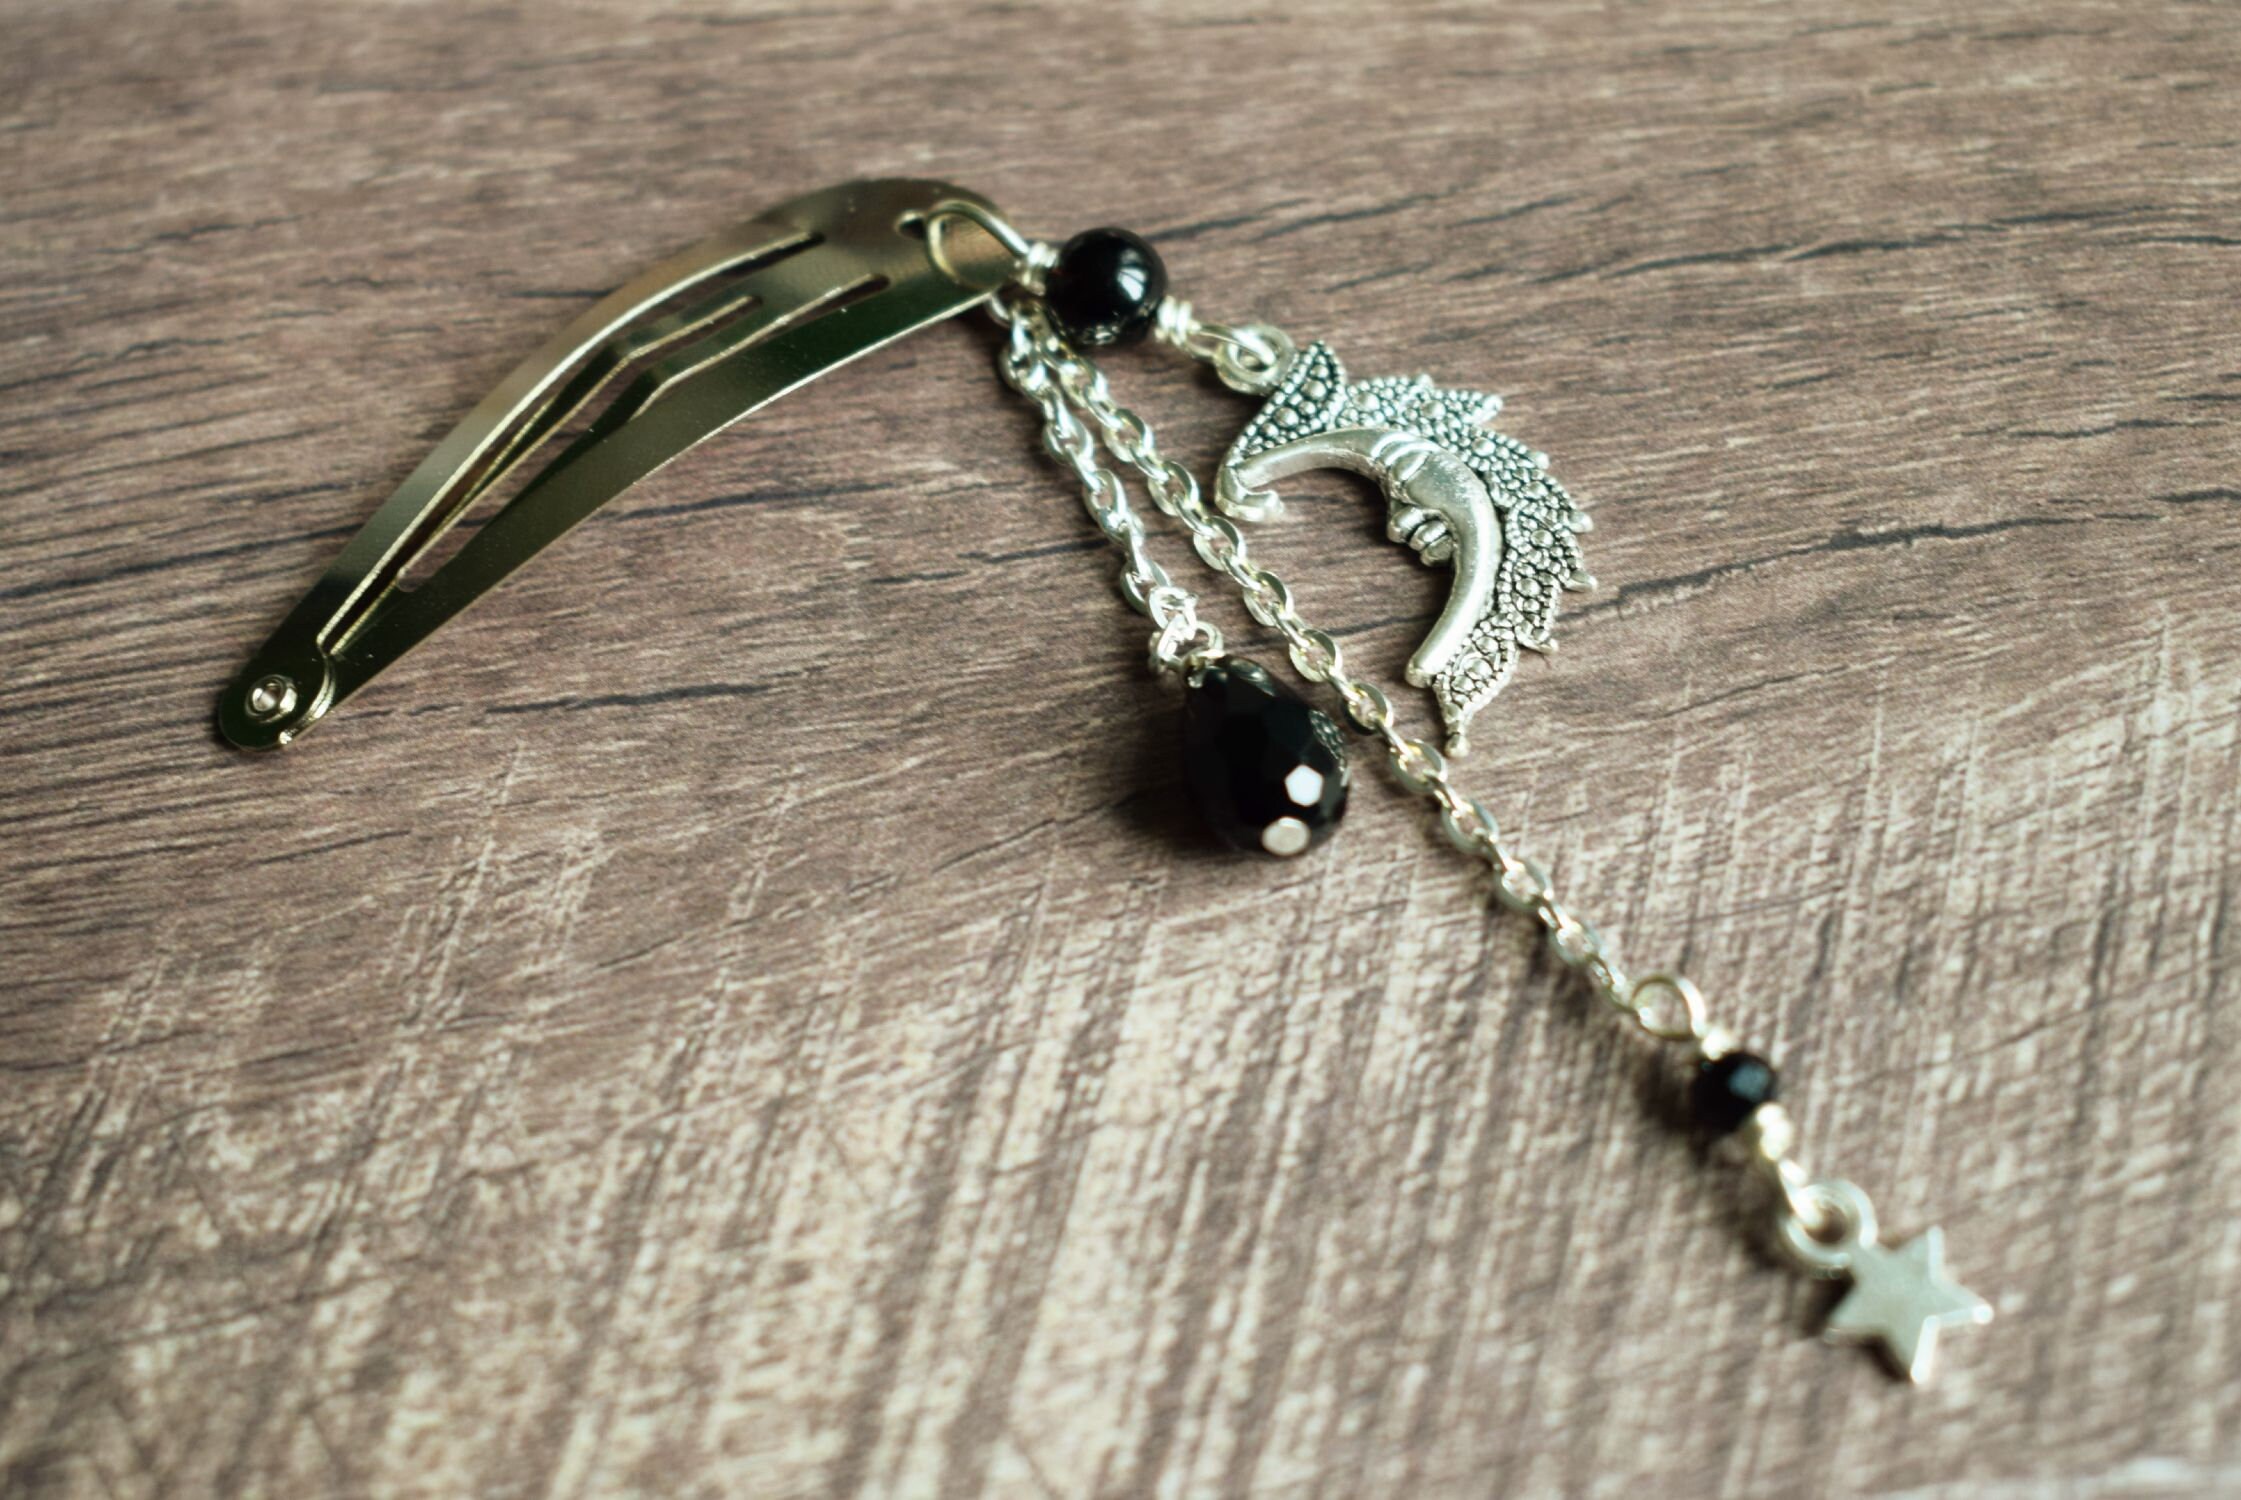 Brass or Sterling Silver Saturn Hair Slide Two Piece Hair Holder